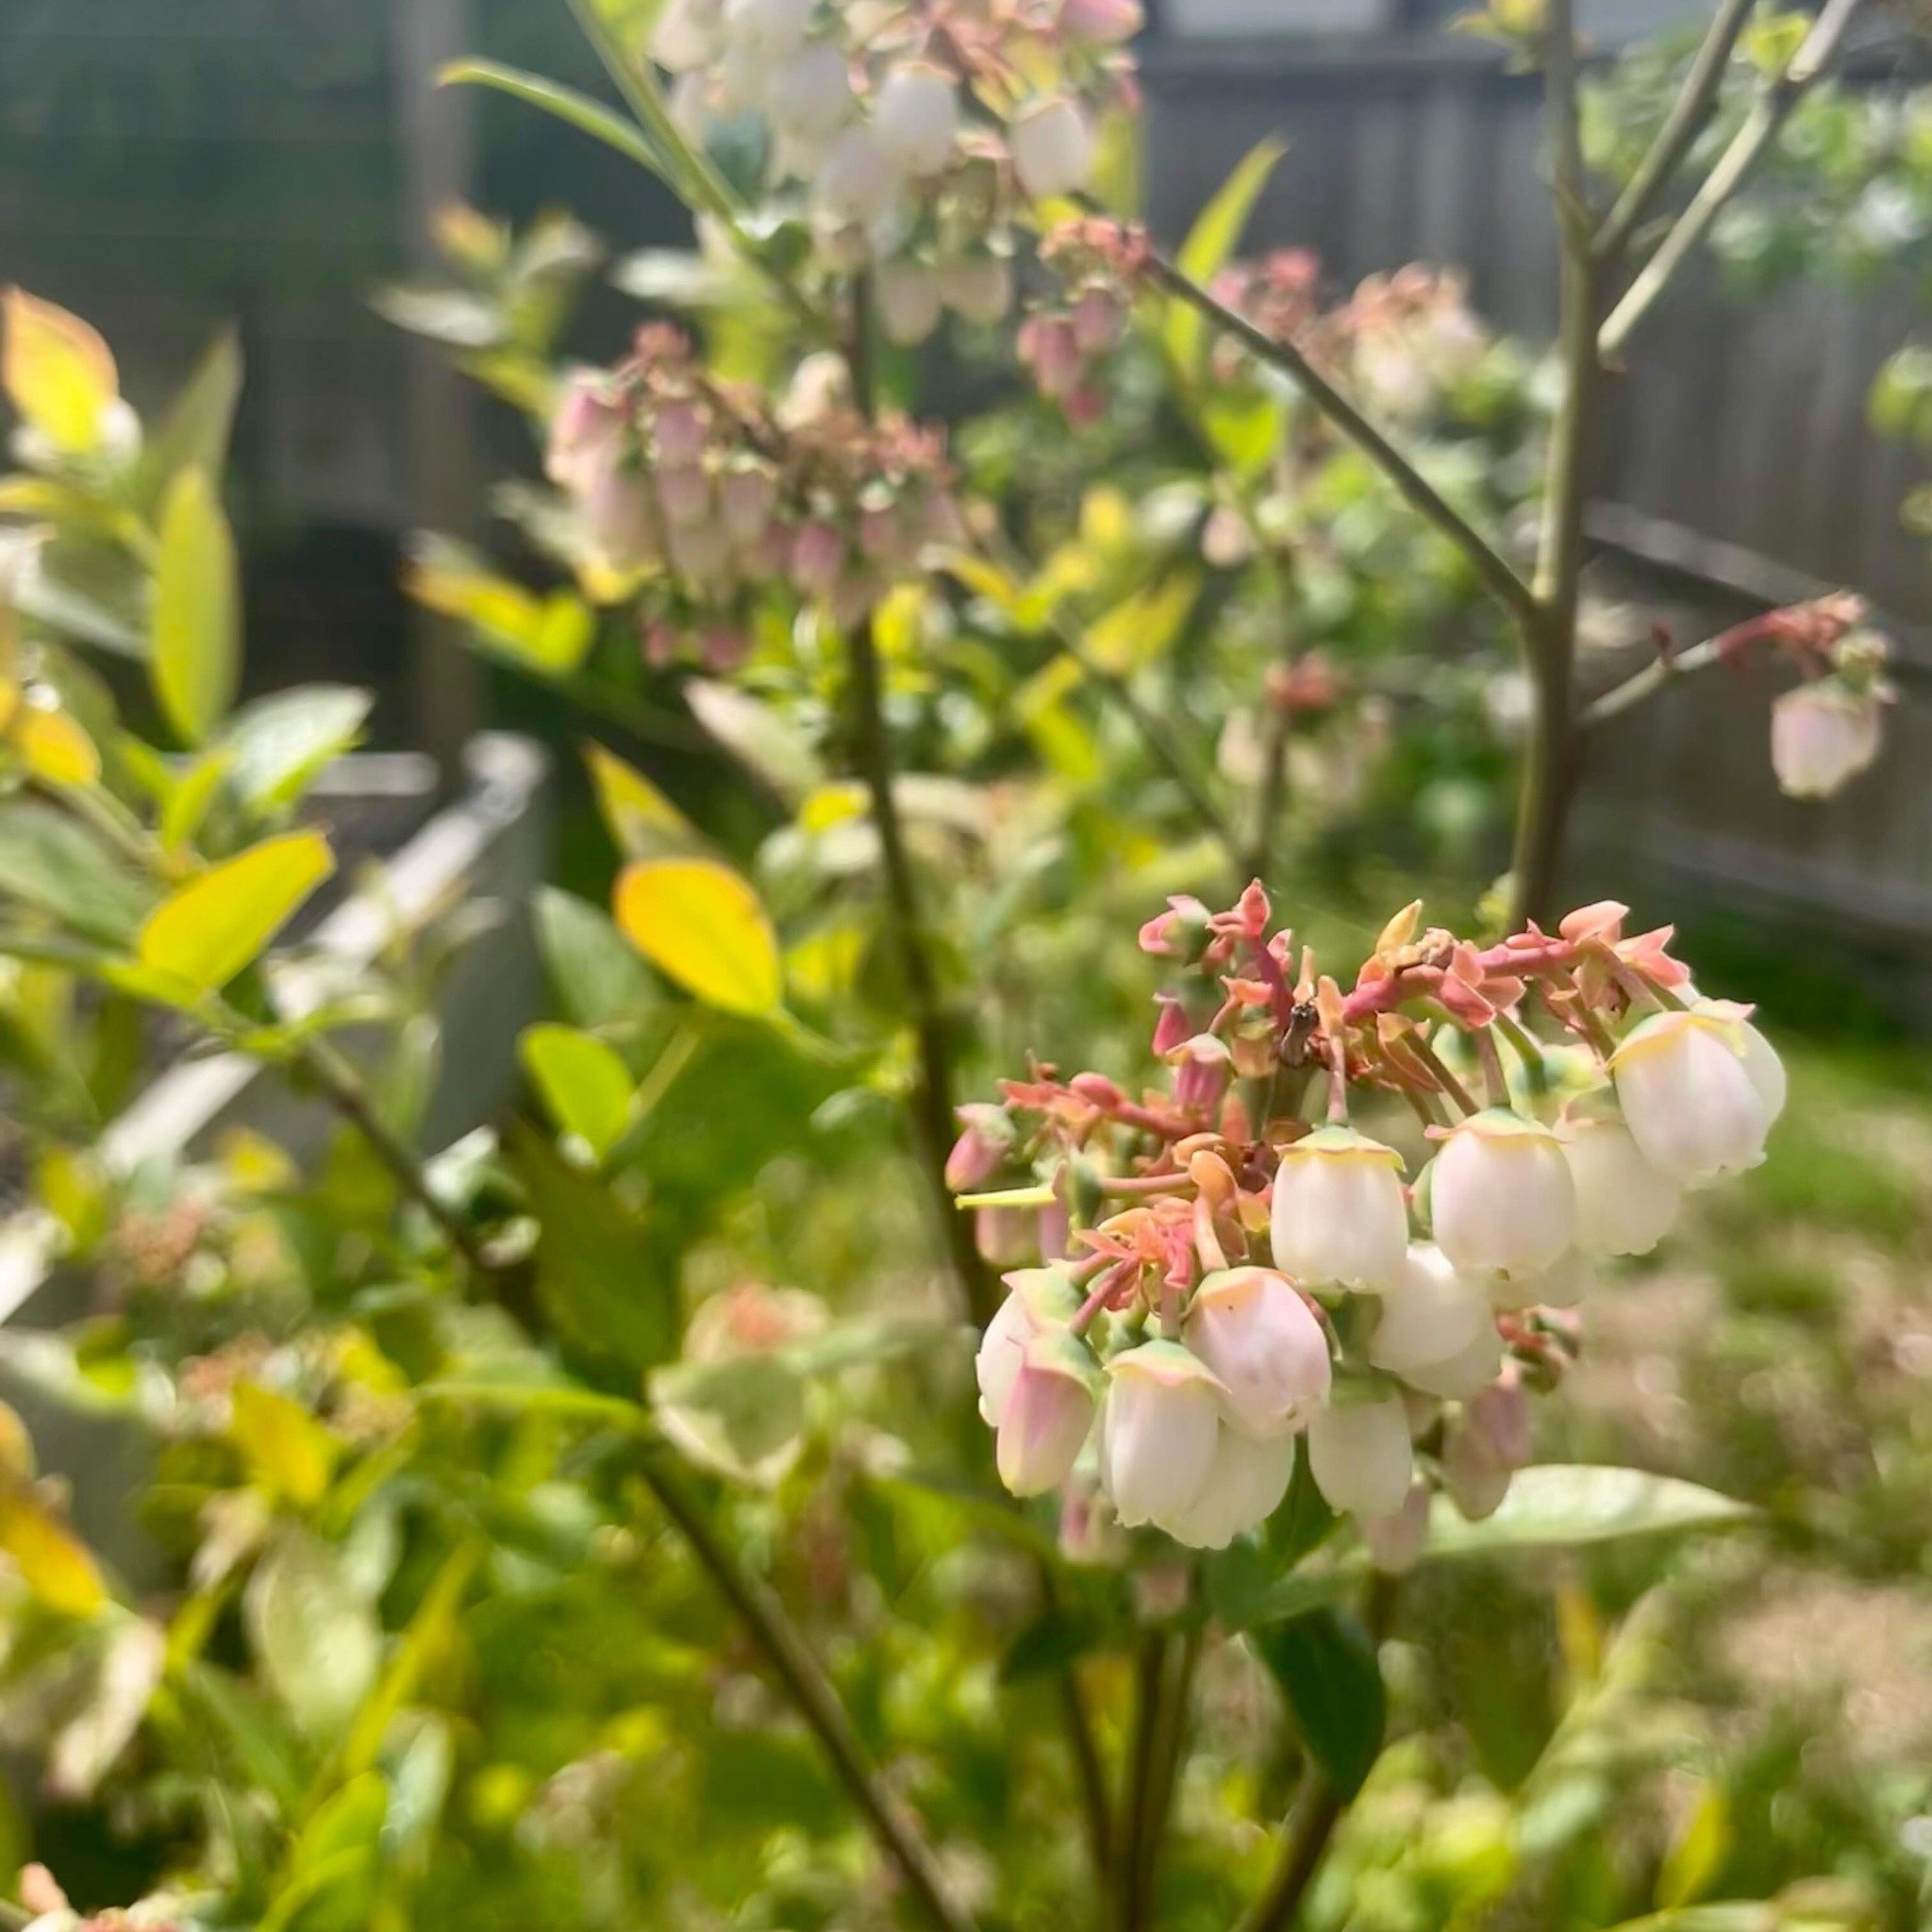 Hoping for a great blueberry season this year - the blossoms are plentiful!

What are you growing this year?

#ladner #ladnerbc #deltabc #tsawwassenbc #tsawwassen #gardening #garden